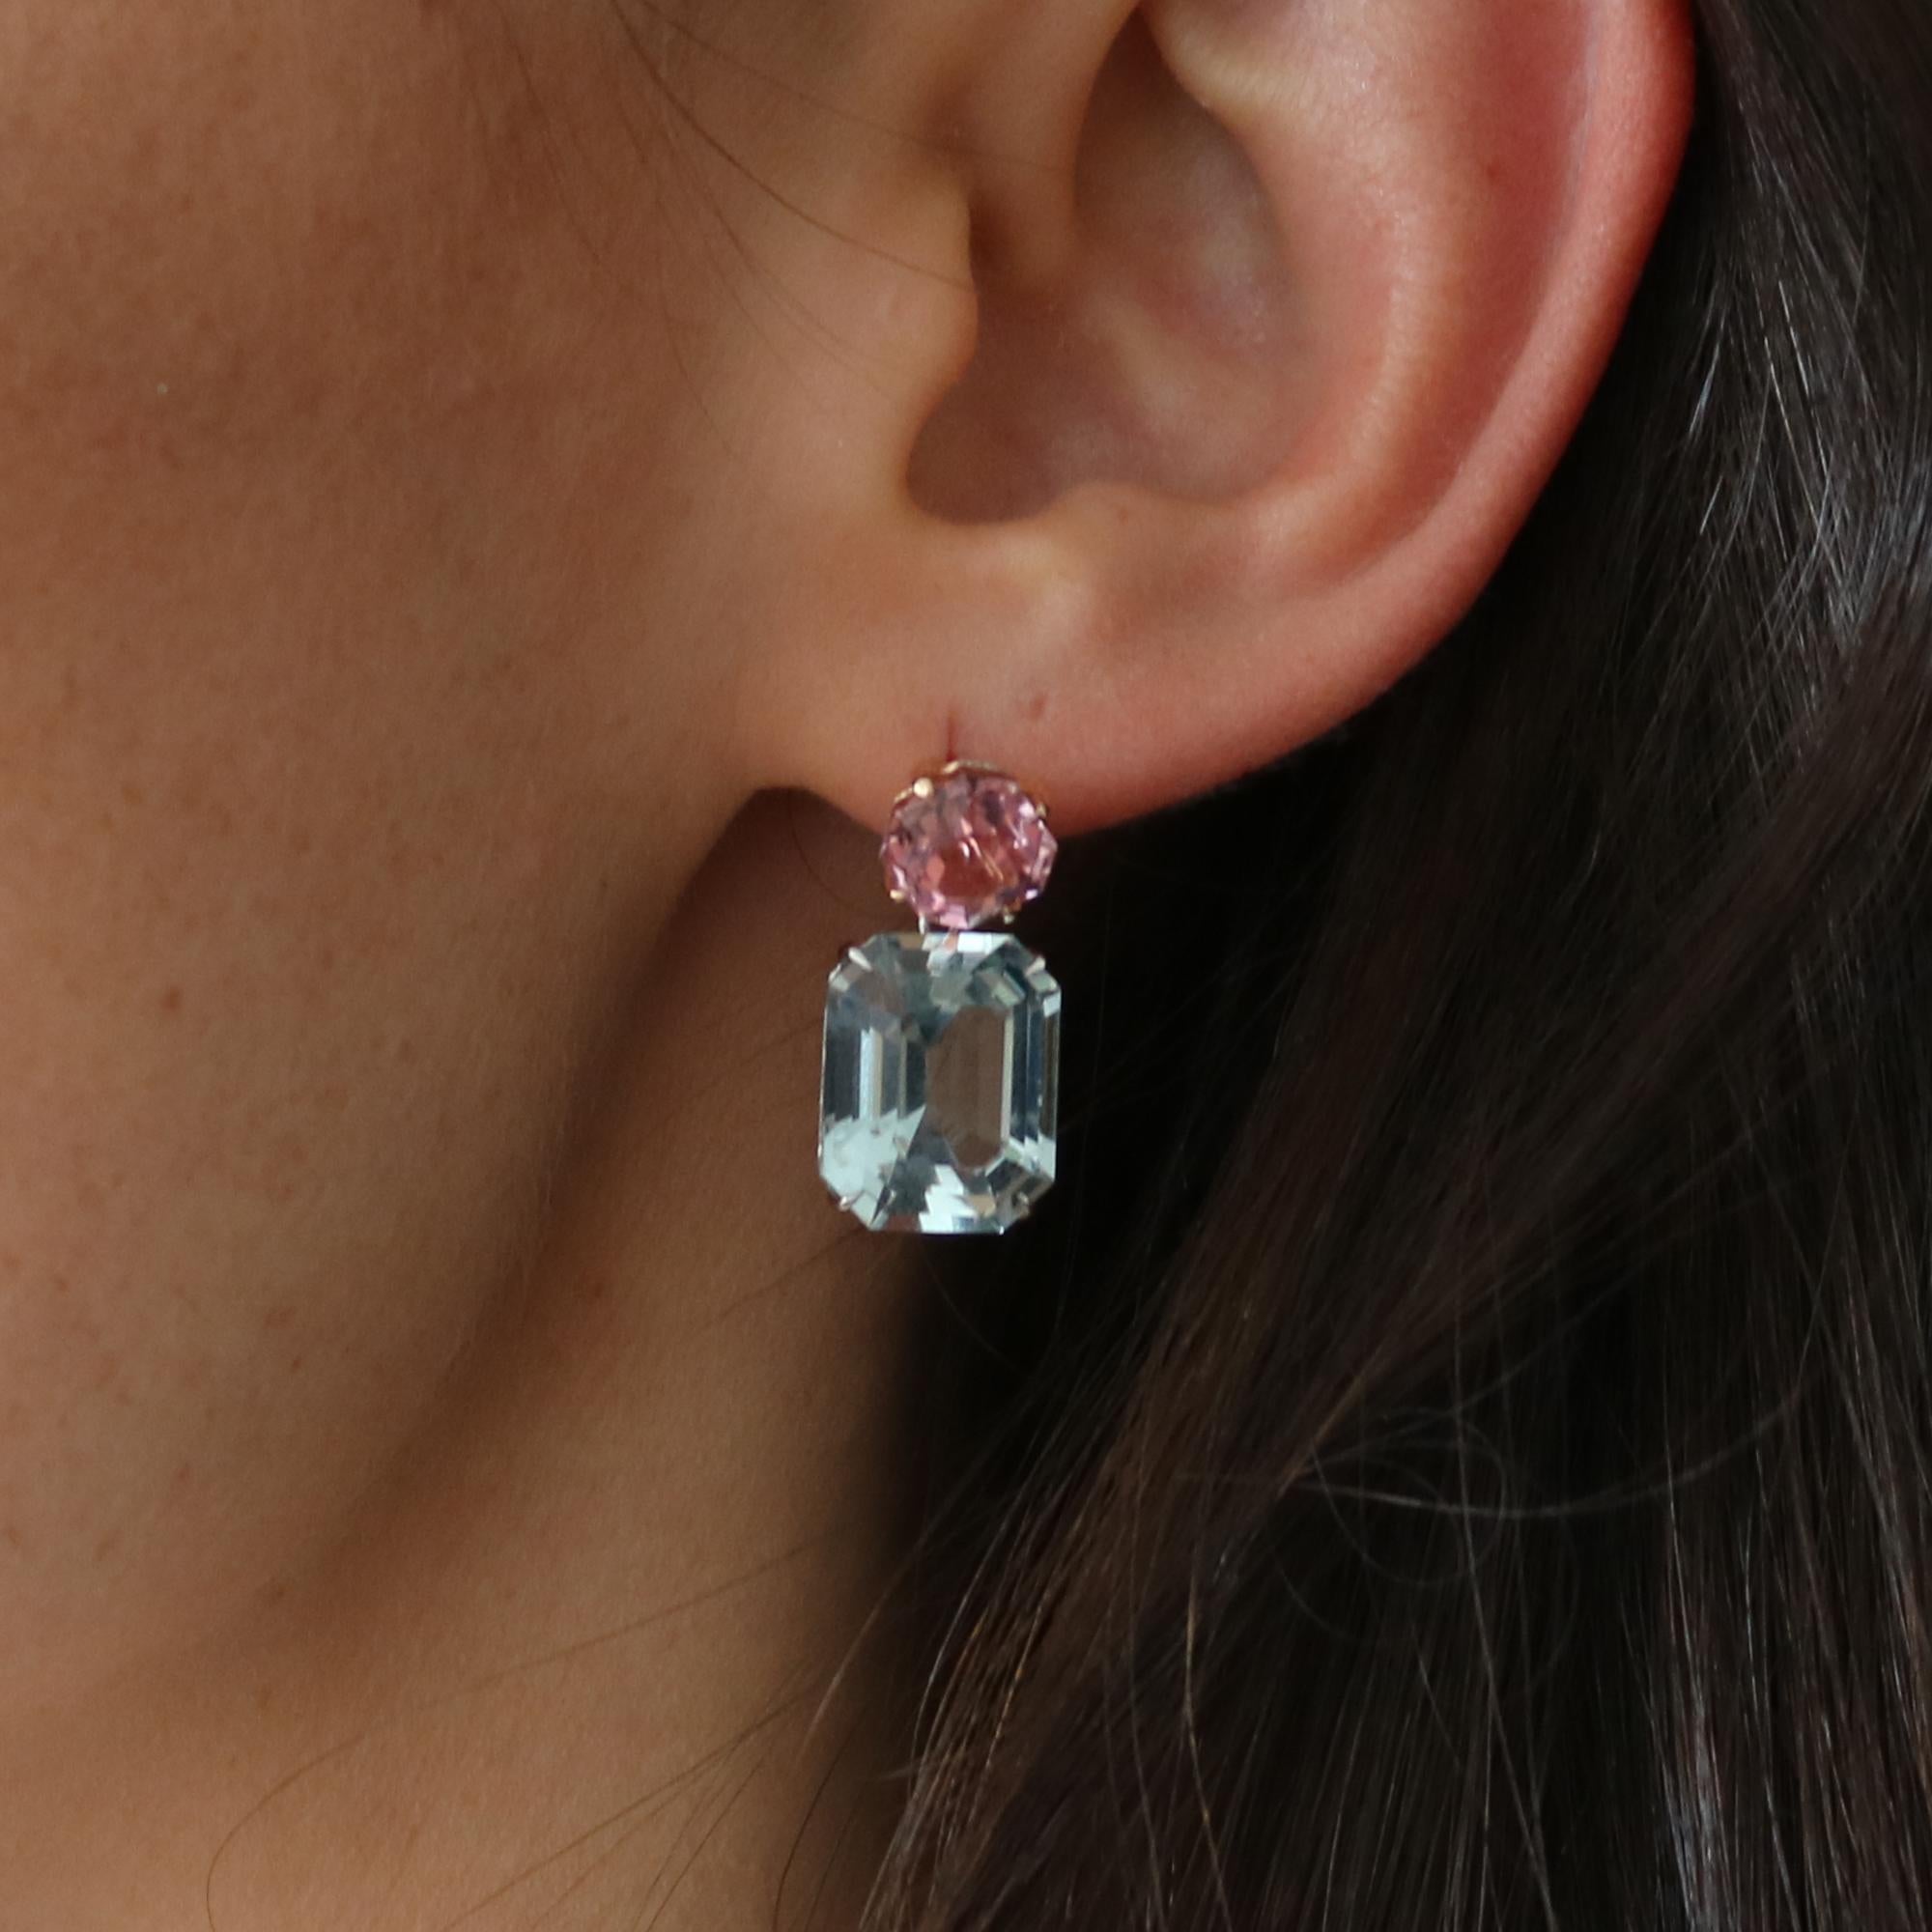 One of a kind aquamarine earrings and pink tourmaline with pave-set round, brilliant diamonds (D-G,VS) in 18kt White Gold and 18kt Rose Gold. 

Old World aquamarine emerald cut proportioned with very modern pink tourmaline facets alignment make this